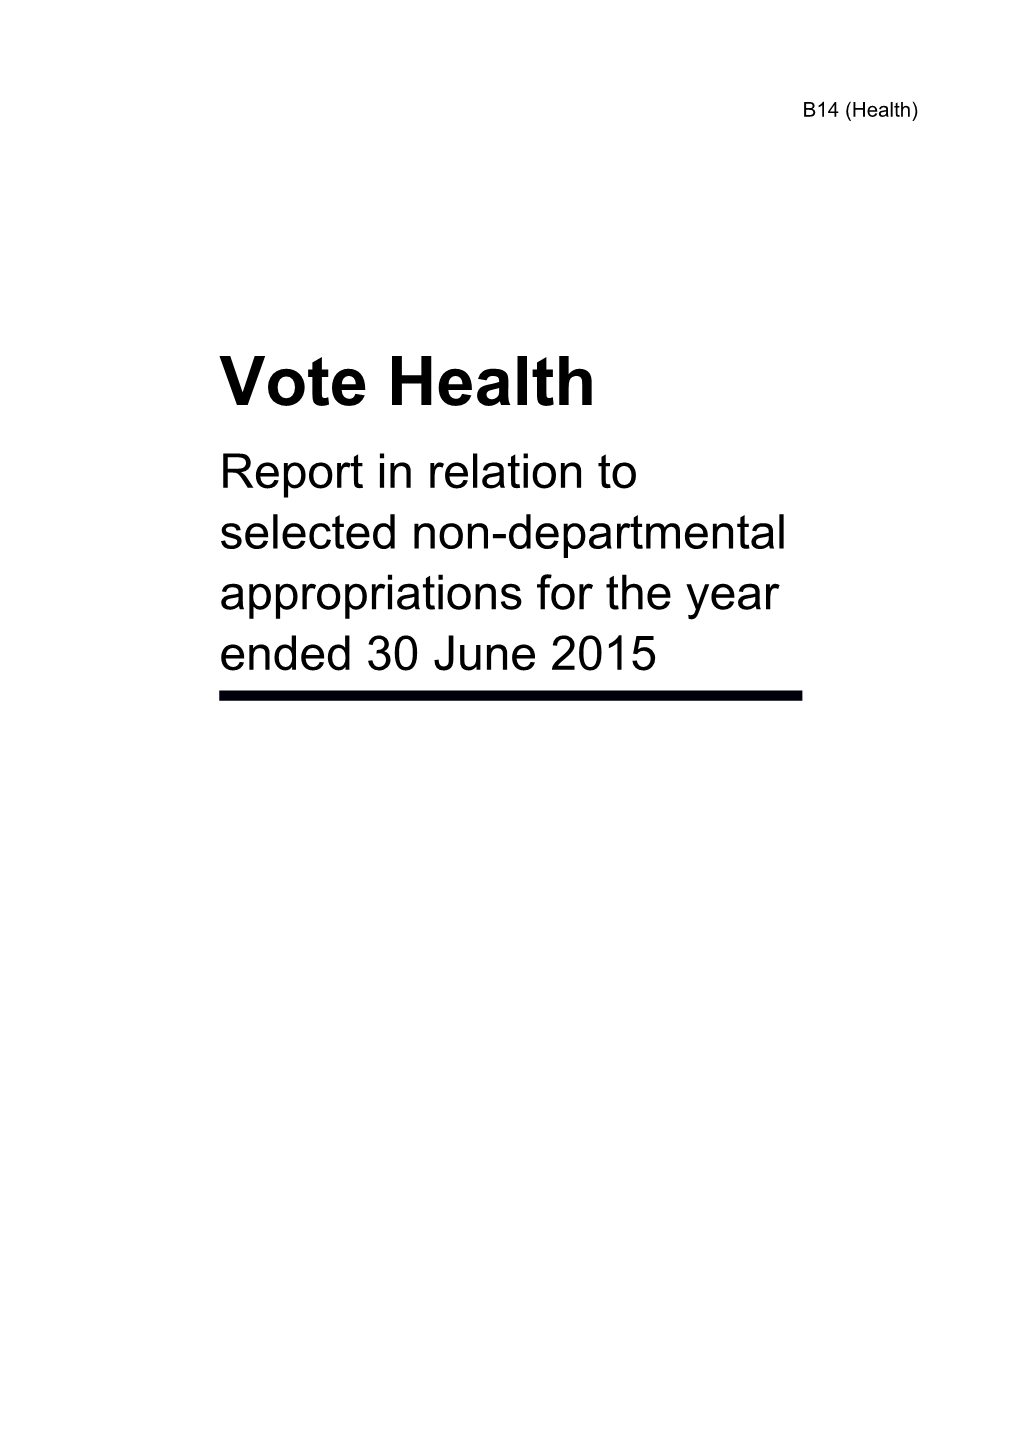 Vote Health Report in Relation to Selected Non-Departmental Appropriations for the Year